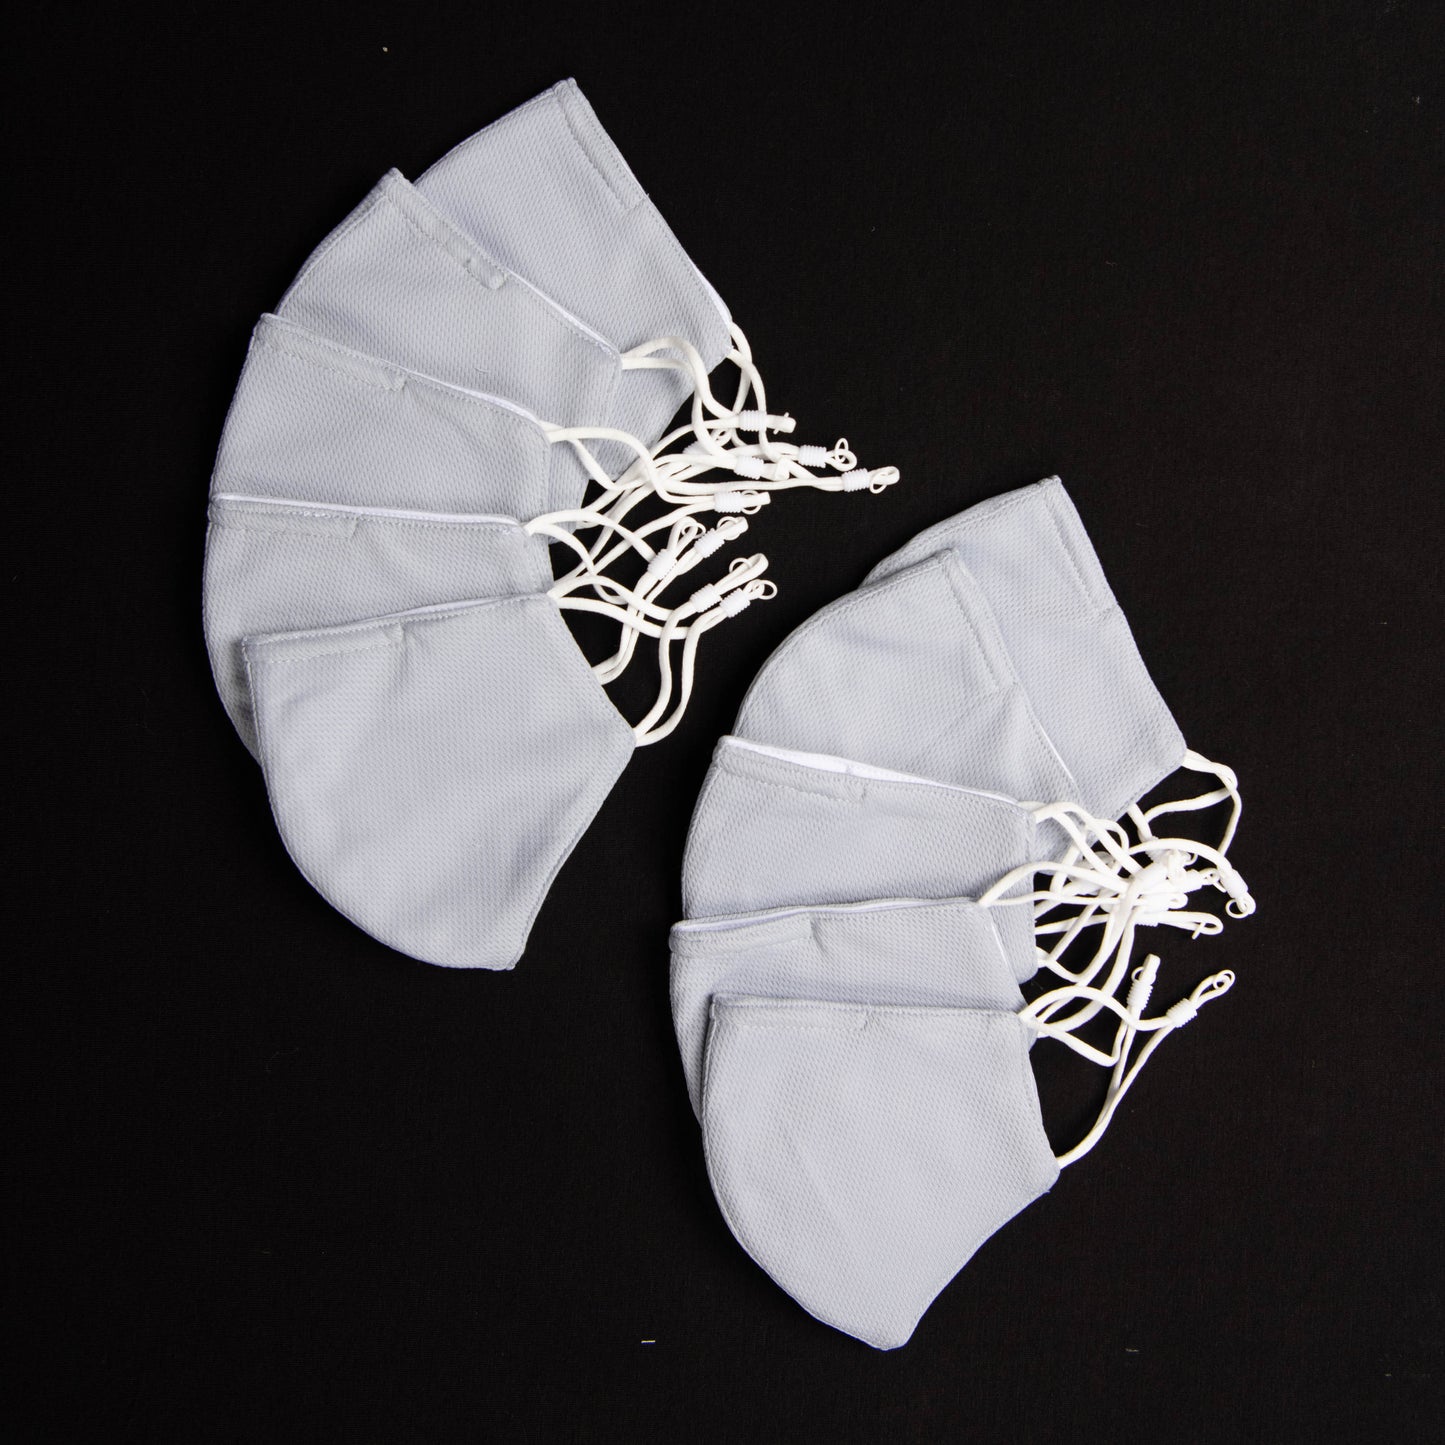 Adult Cloth Masks with Adjustable Ear Loops-Solid Grey-Value 10-Pack-Available Now!!!